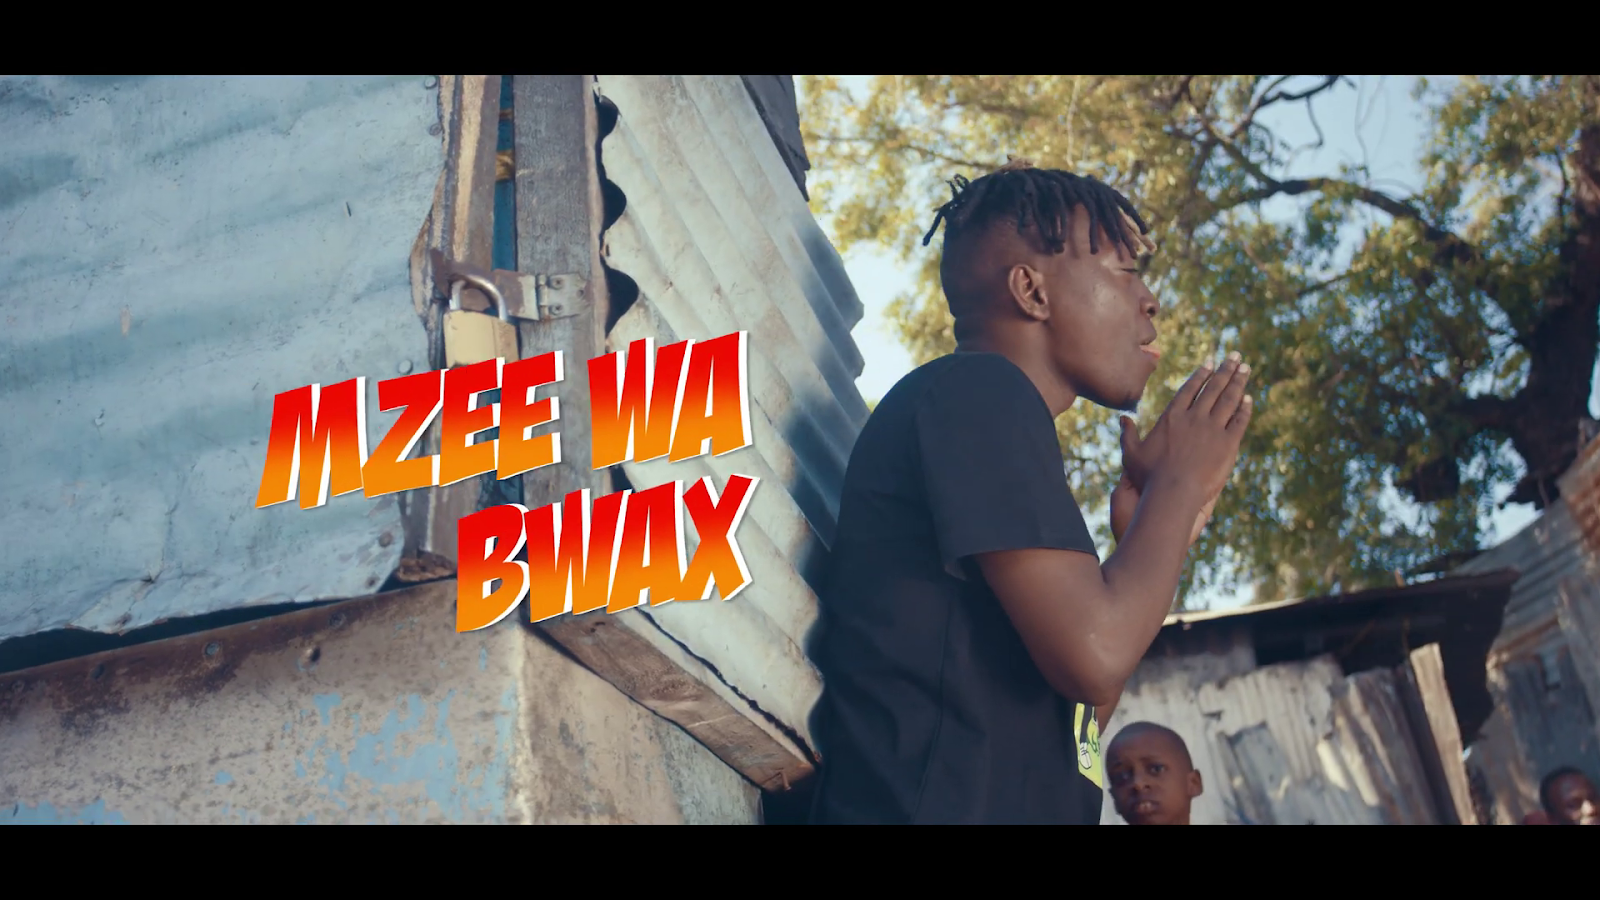 VIDEO | Mzee Wa Bwax – Sanamu la Michelini<br />
<b>Deprecated</b>:  strip_tags(): Passing null to parameter #1 ($string) of type string is deprecated in <b>/home/djmwanga/public_html/wp-content/themes/Newsmag/loop-single.php</b> on line <b>60</b><br />
